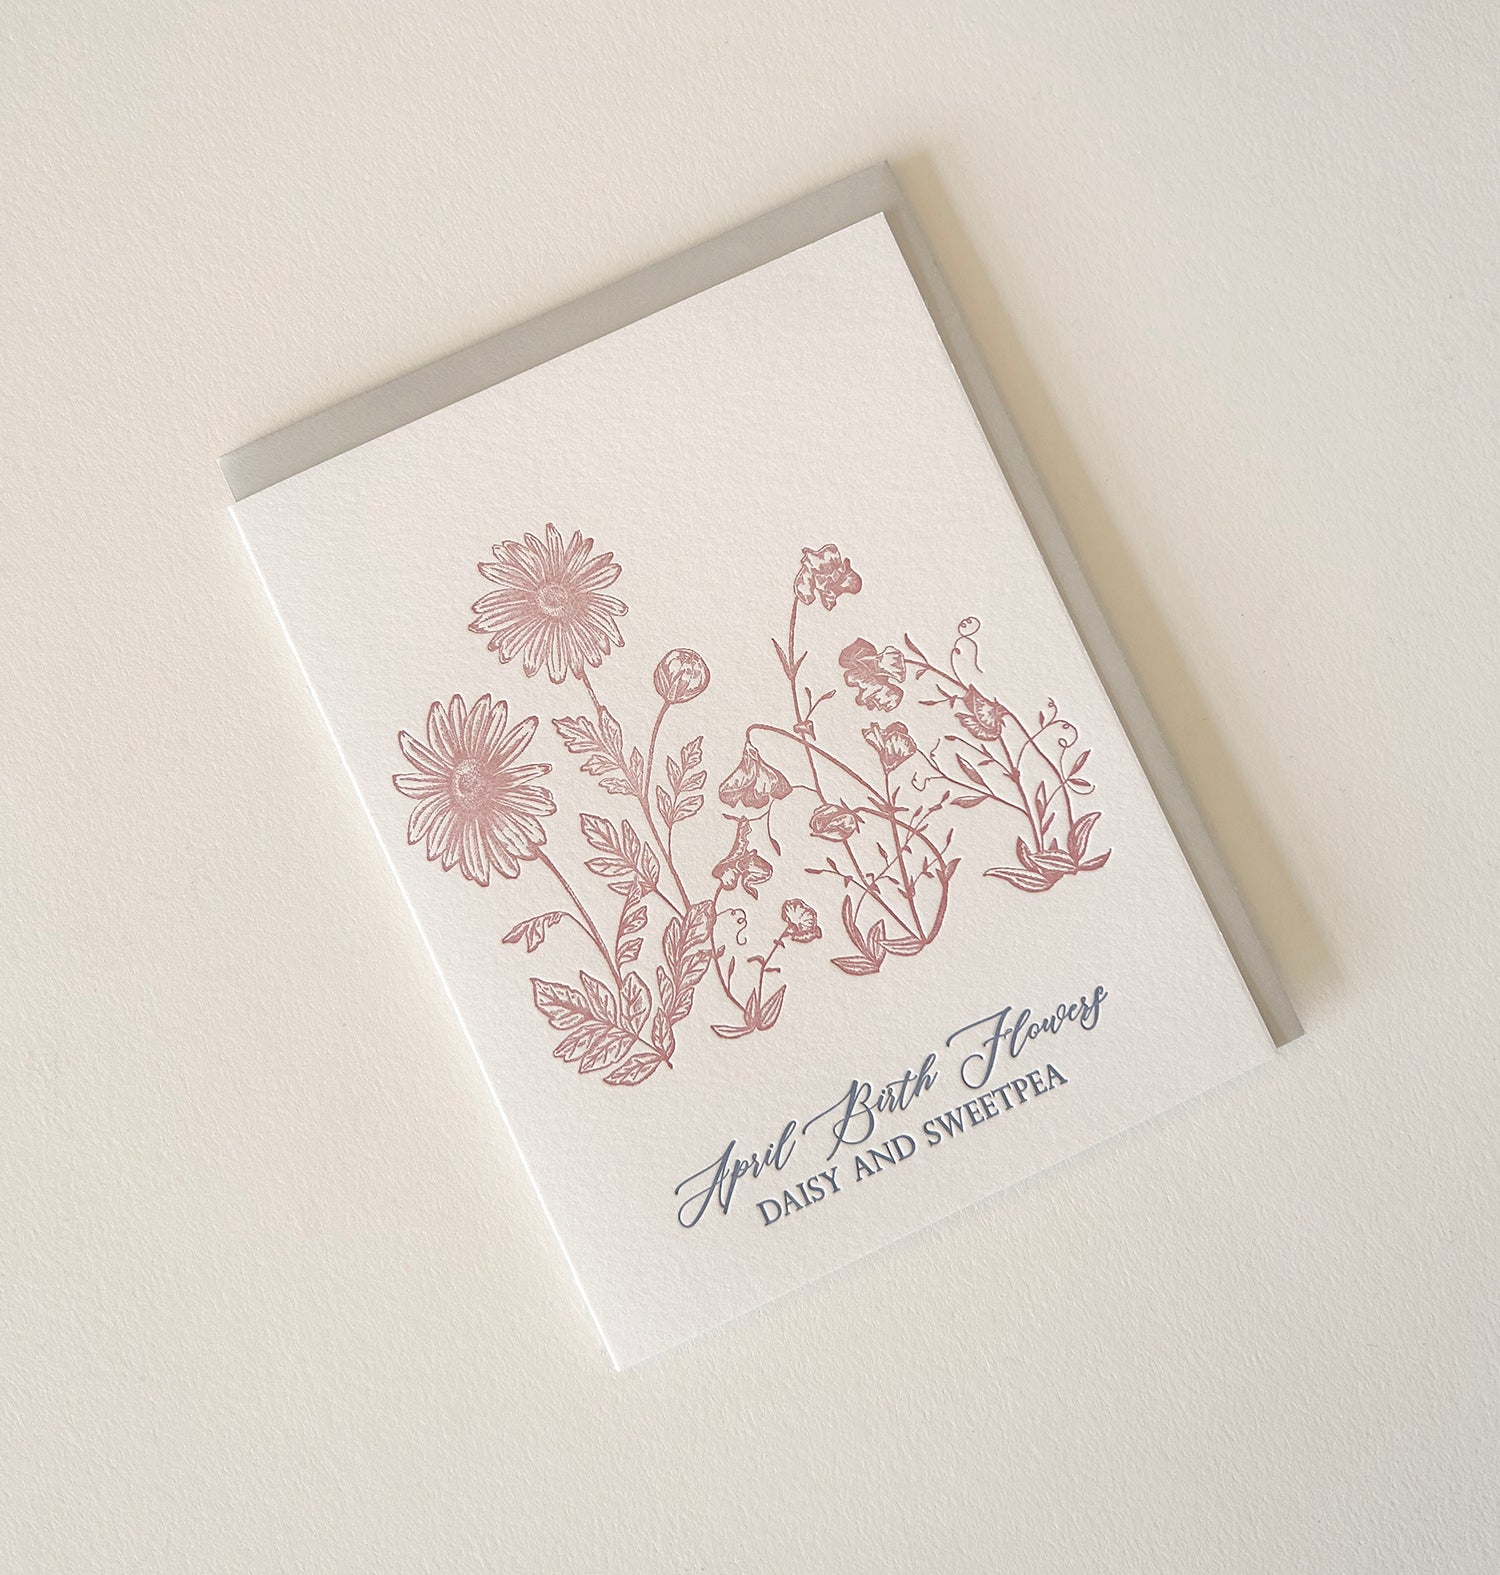 Letterpress birthday card with florals that says "April Birth Flowers, Daisy and Sweetpea" by Rust Belt Love